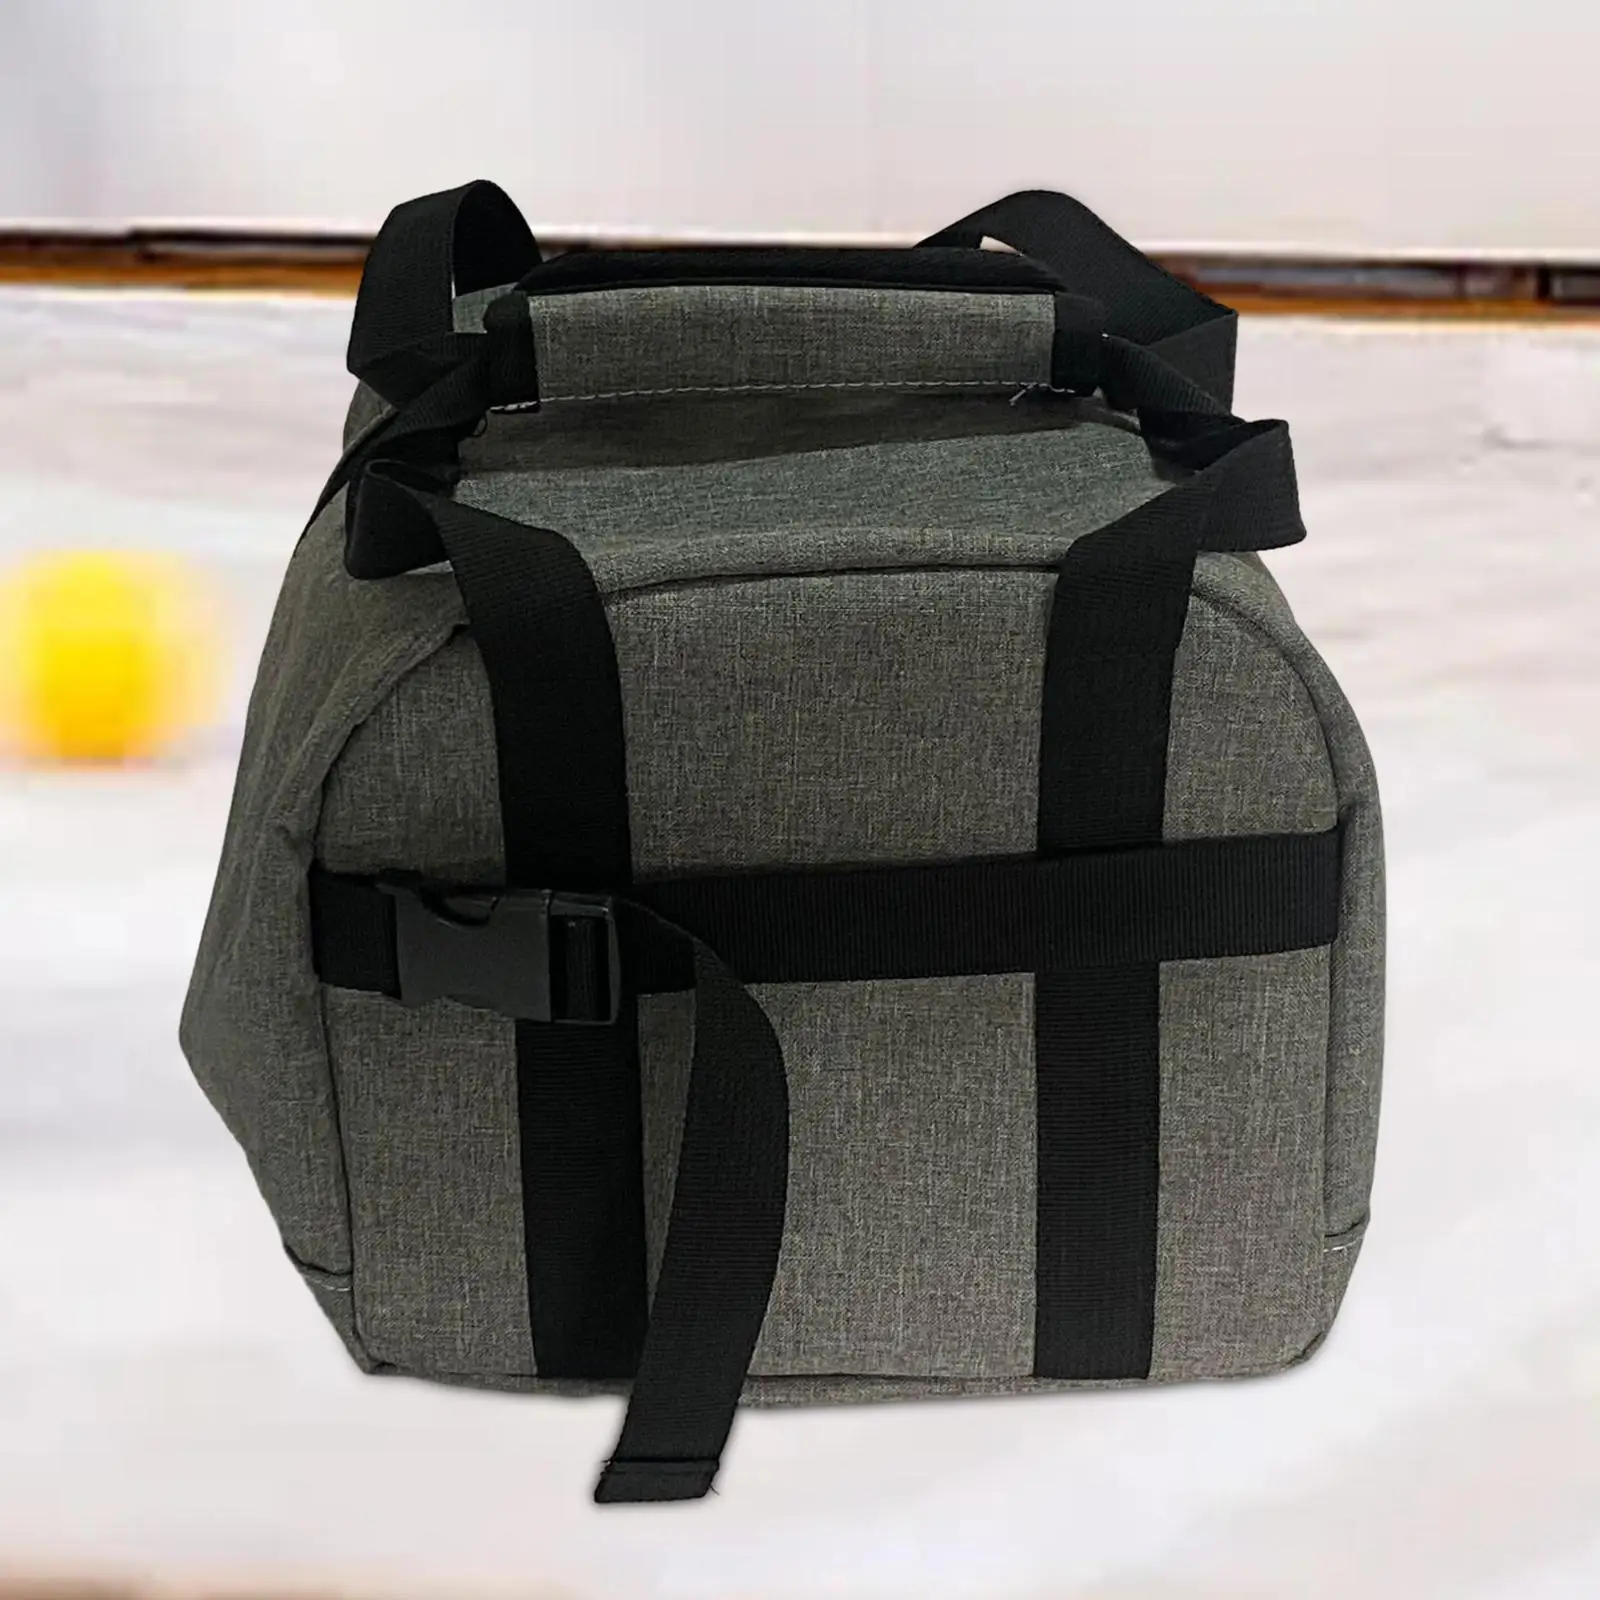 Single Bowling Ball Bag Carry Bag Double Zipper Add on for Luggage for Easy Carrying Stylish Bowling Ball Holder for Women Men